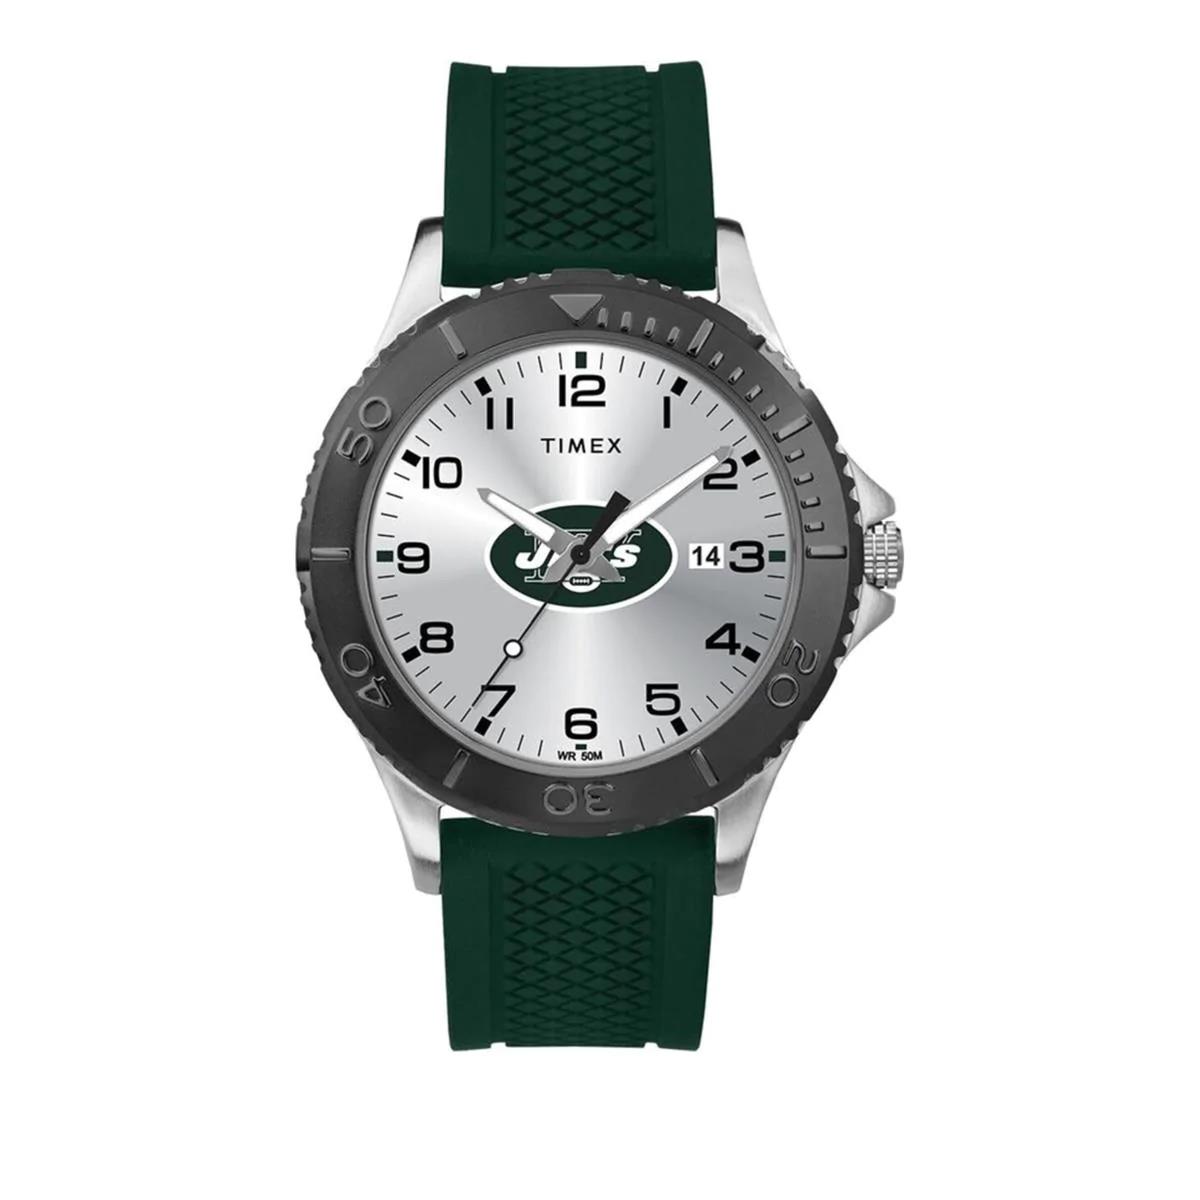 Officially Licensed Nfl Men`s Gamer Watch By Timex 630075-J New York Jets